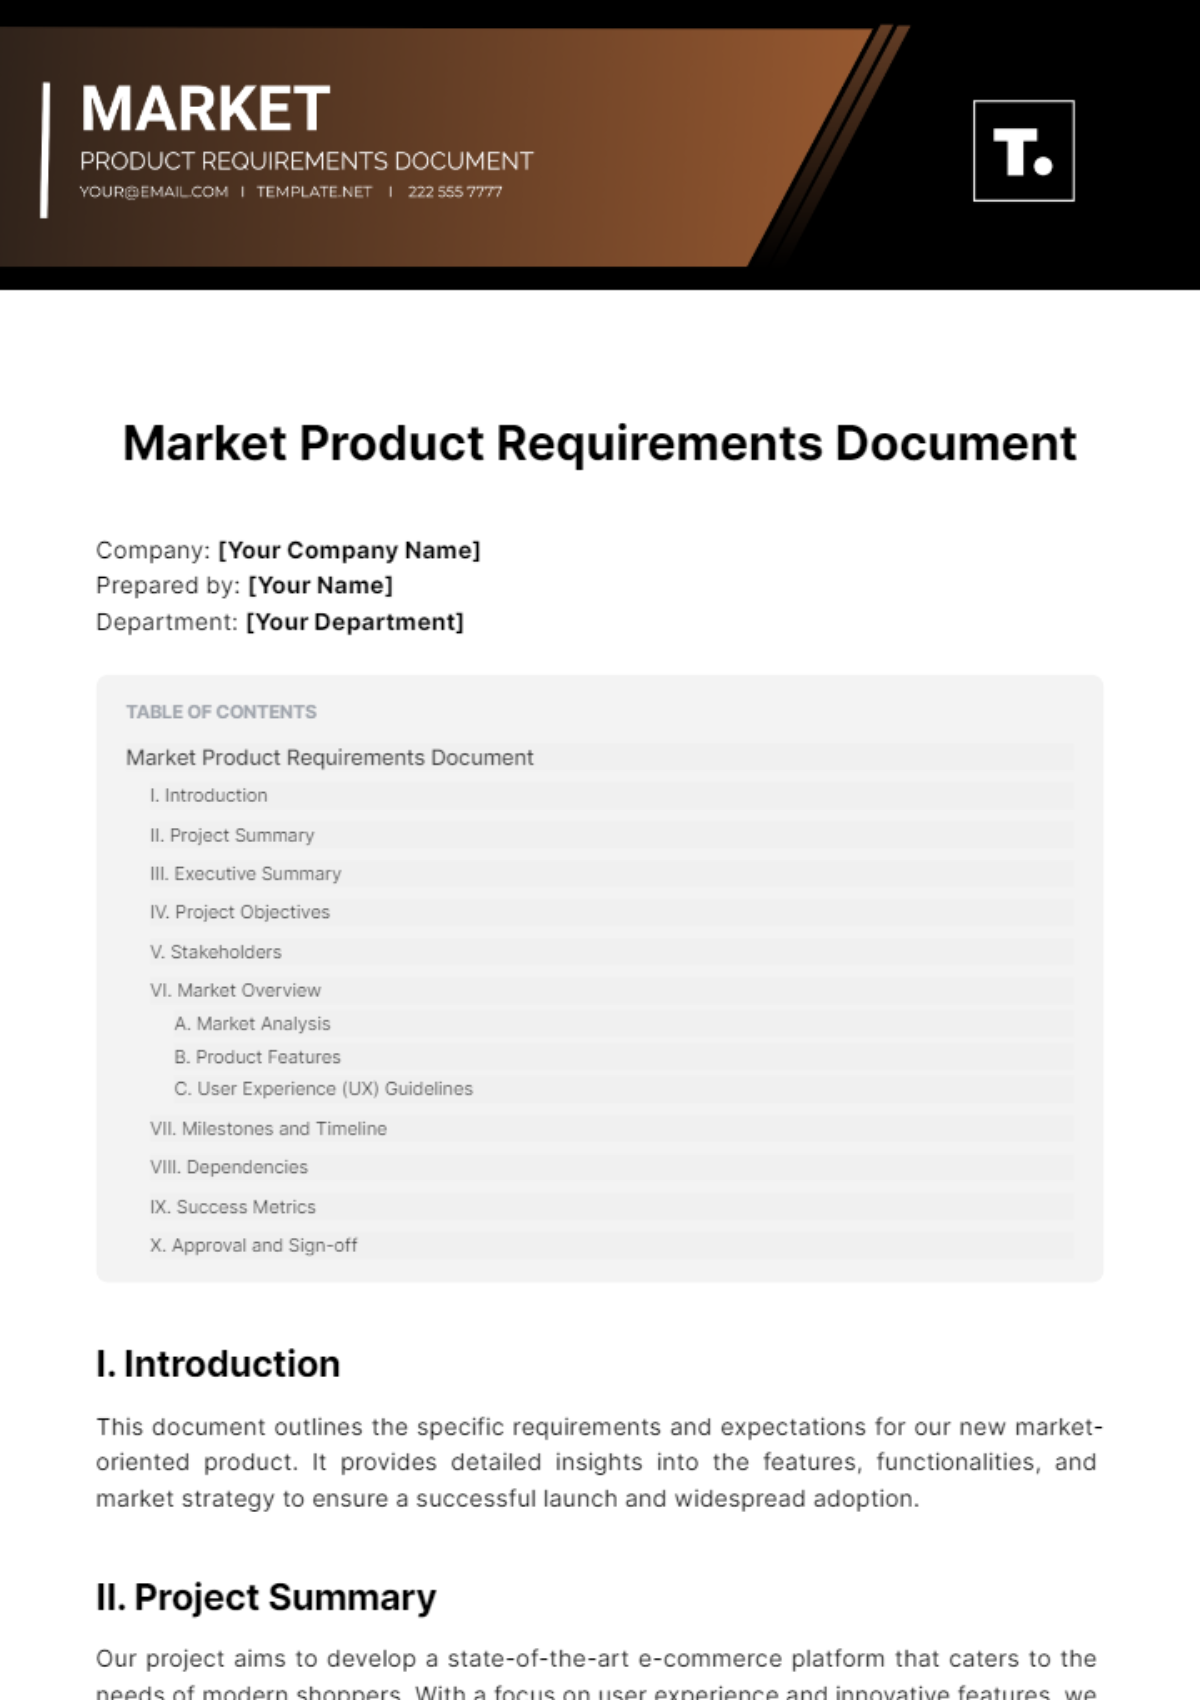 Market Product Requirements Document Template